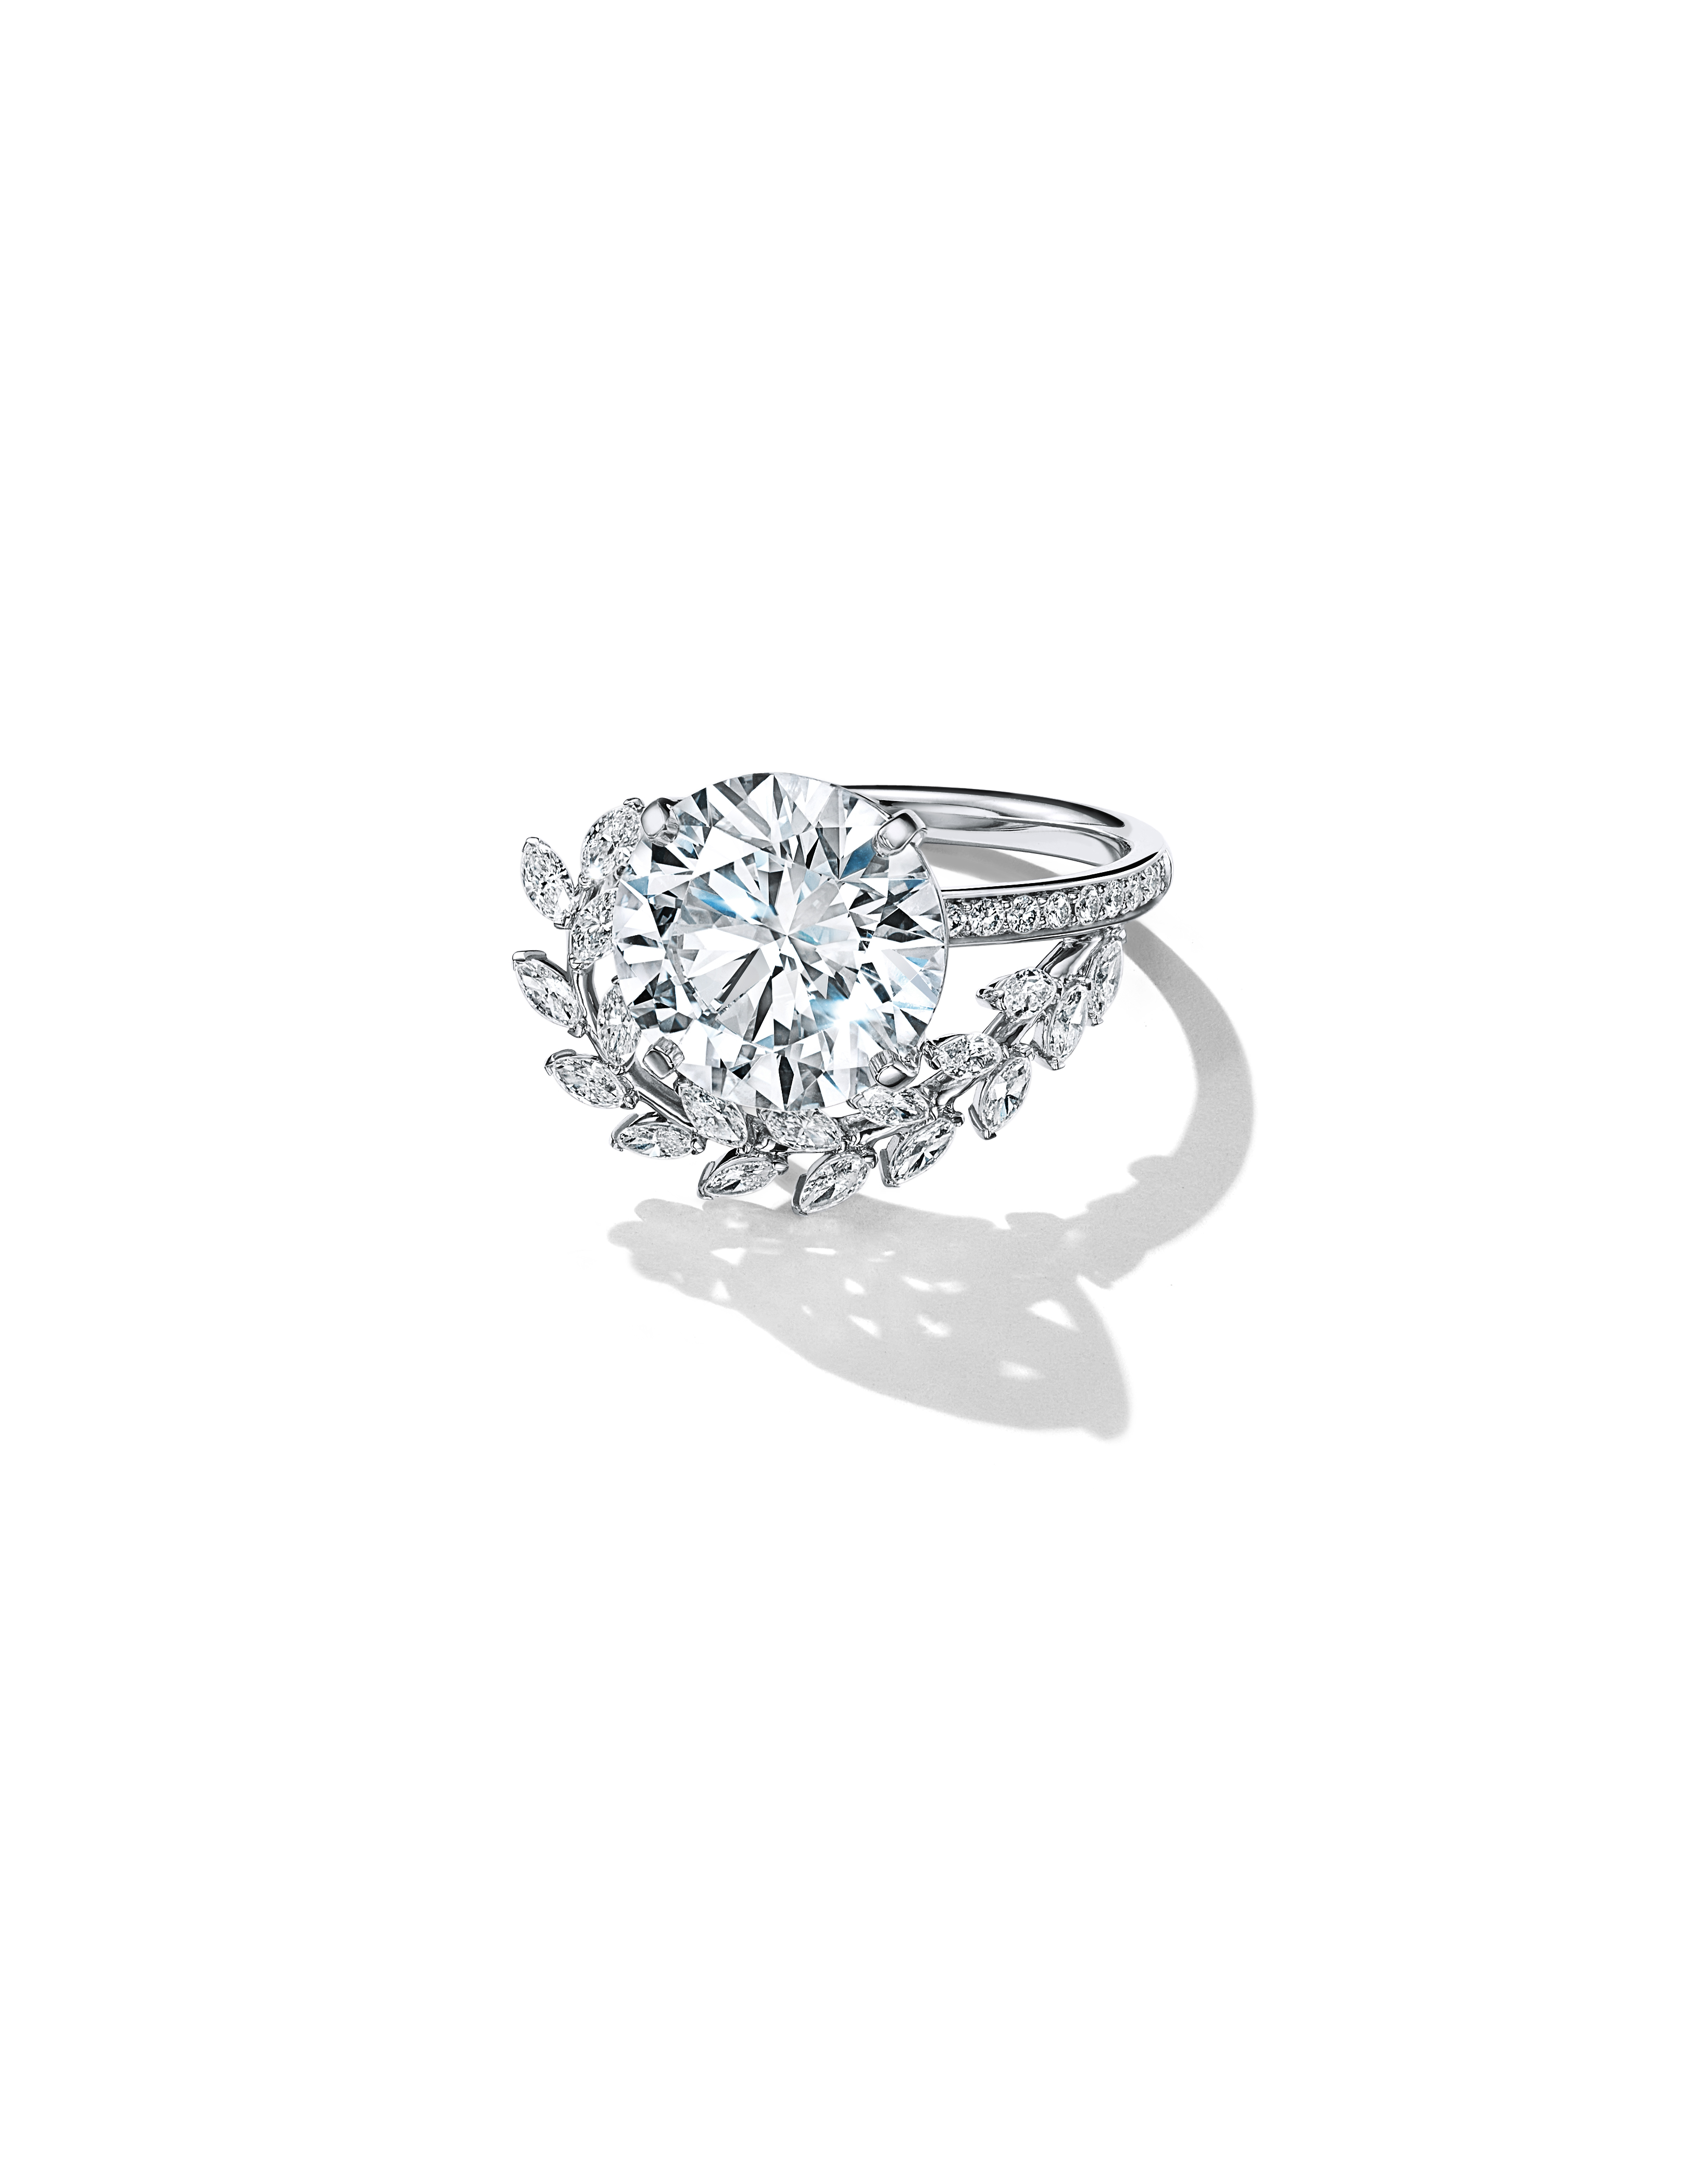 Tiffany Victoria® Diamond Vine engagement ring in platinum with a round